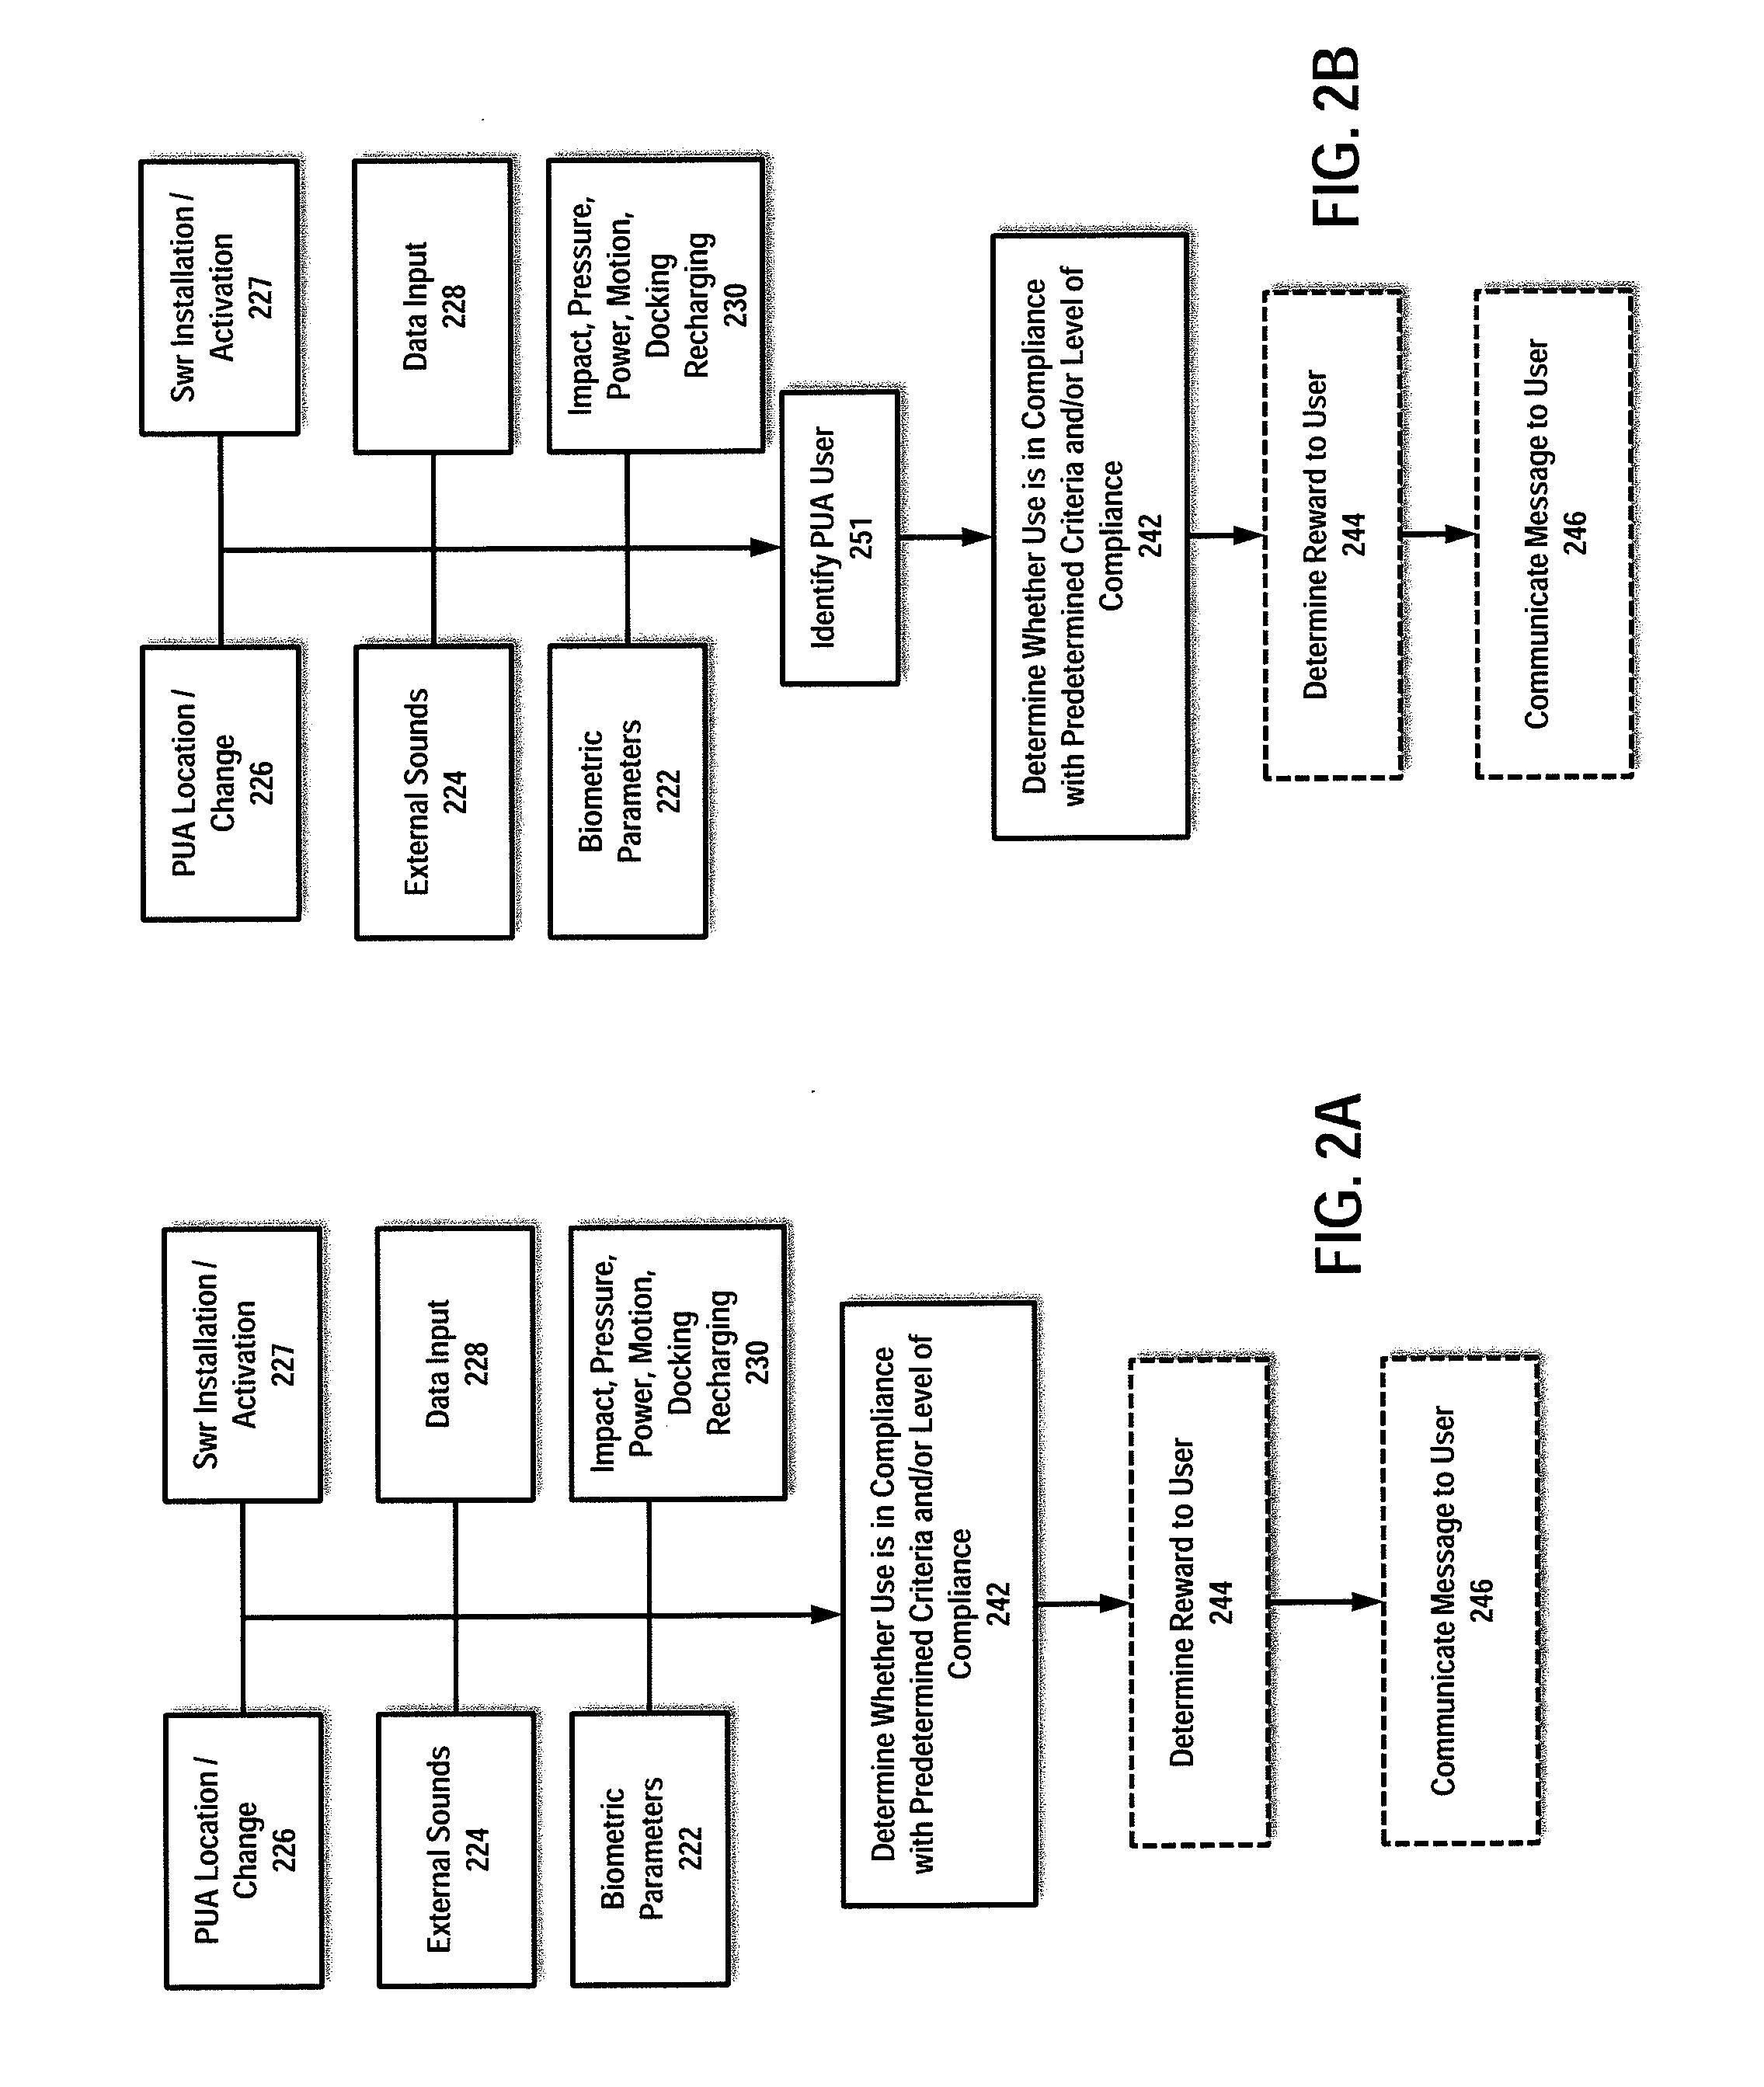 System and method for determining device compliance and recruitment